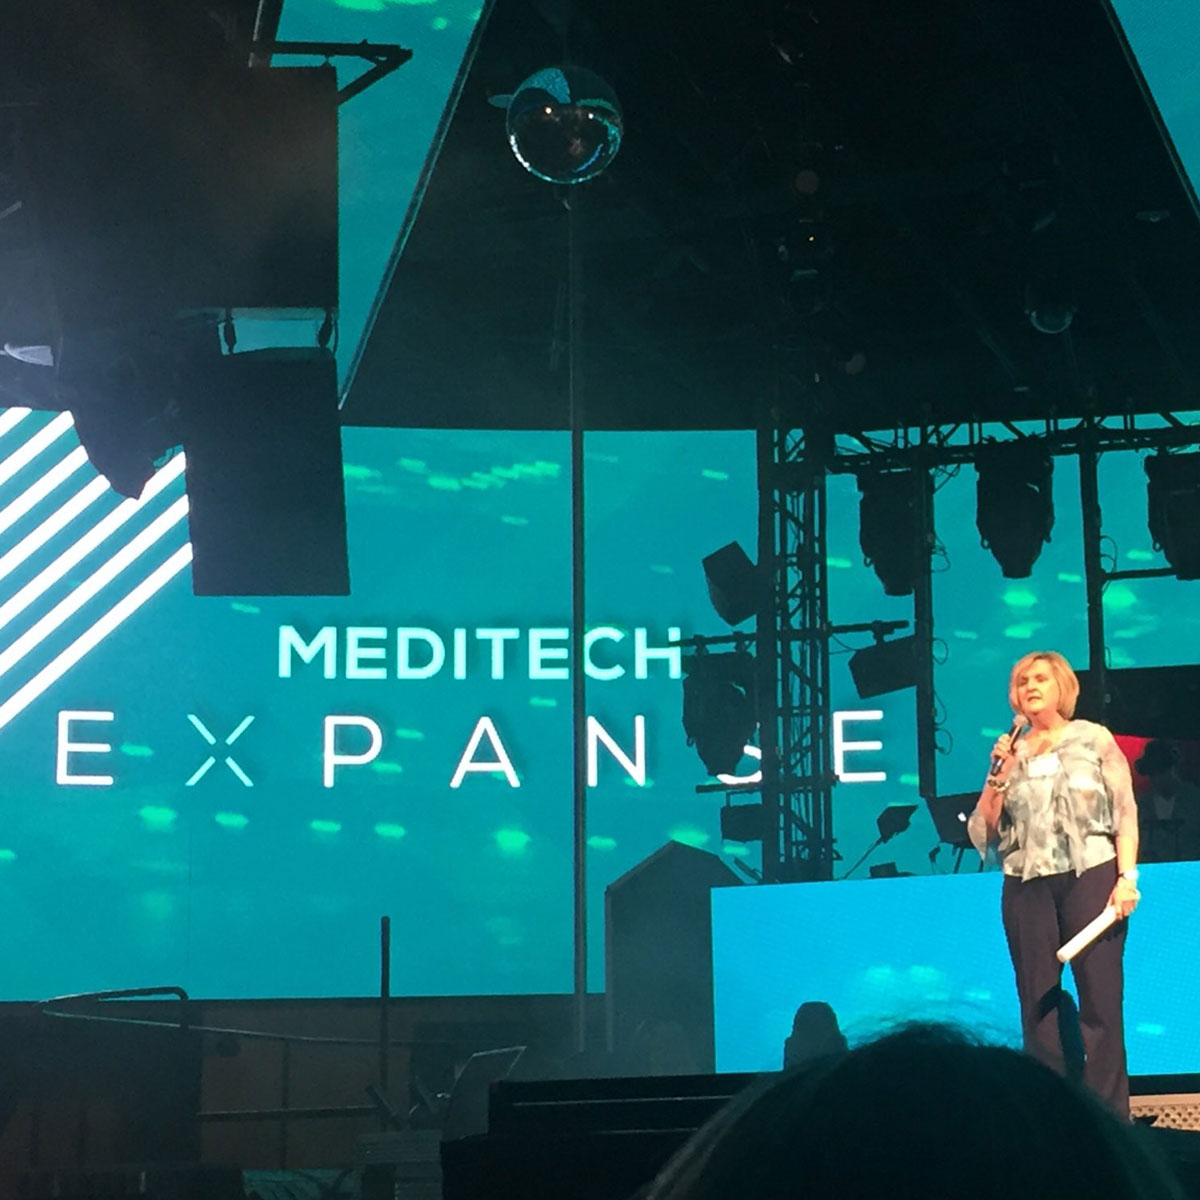 MediTech Expanse Brand Identity Consulting: Helen Waters Speaking at 2018 HIMSS Conference